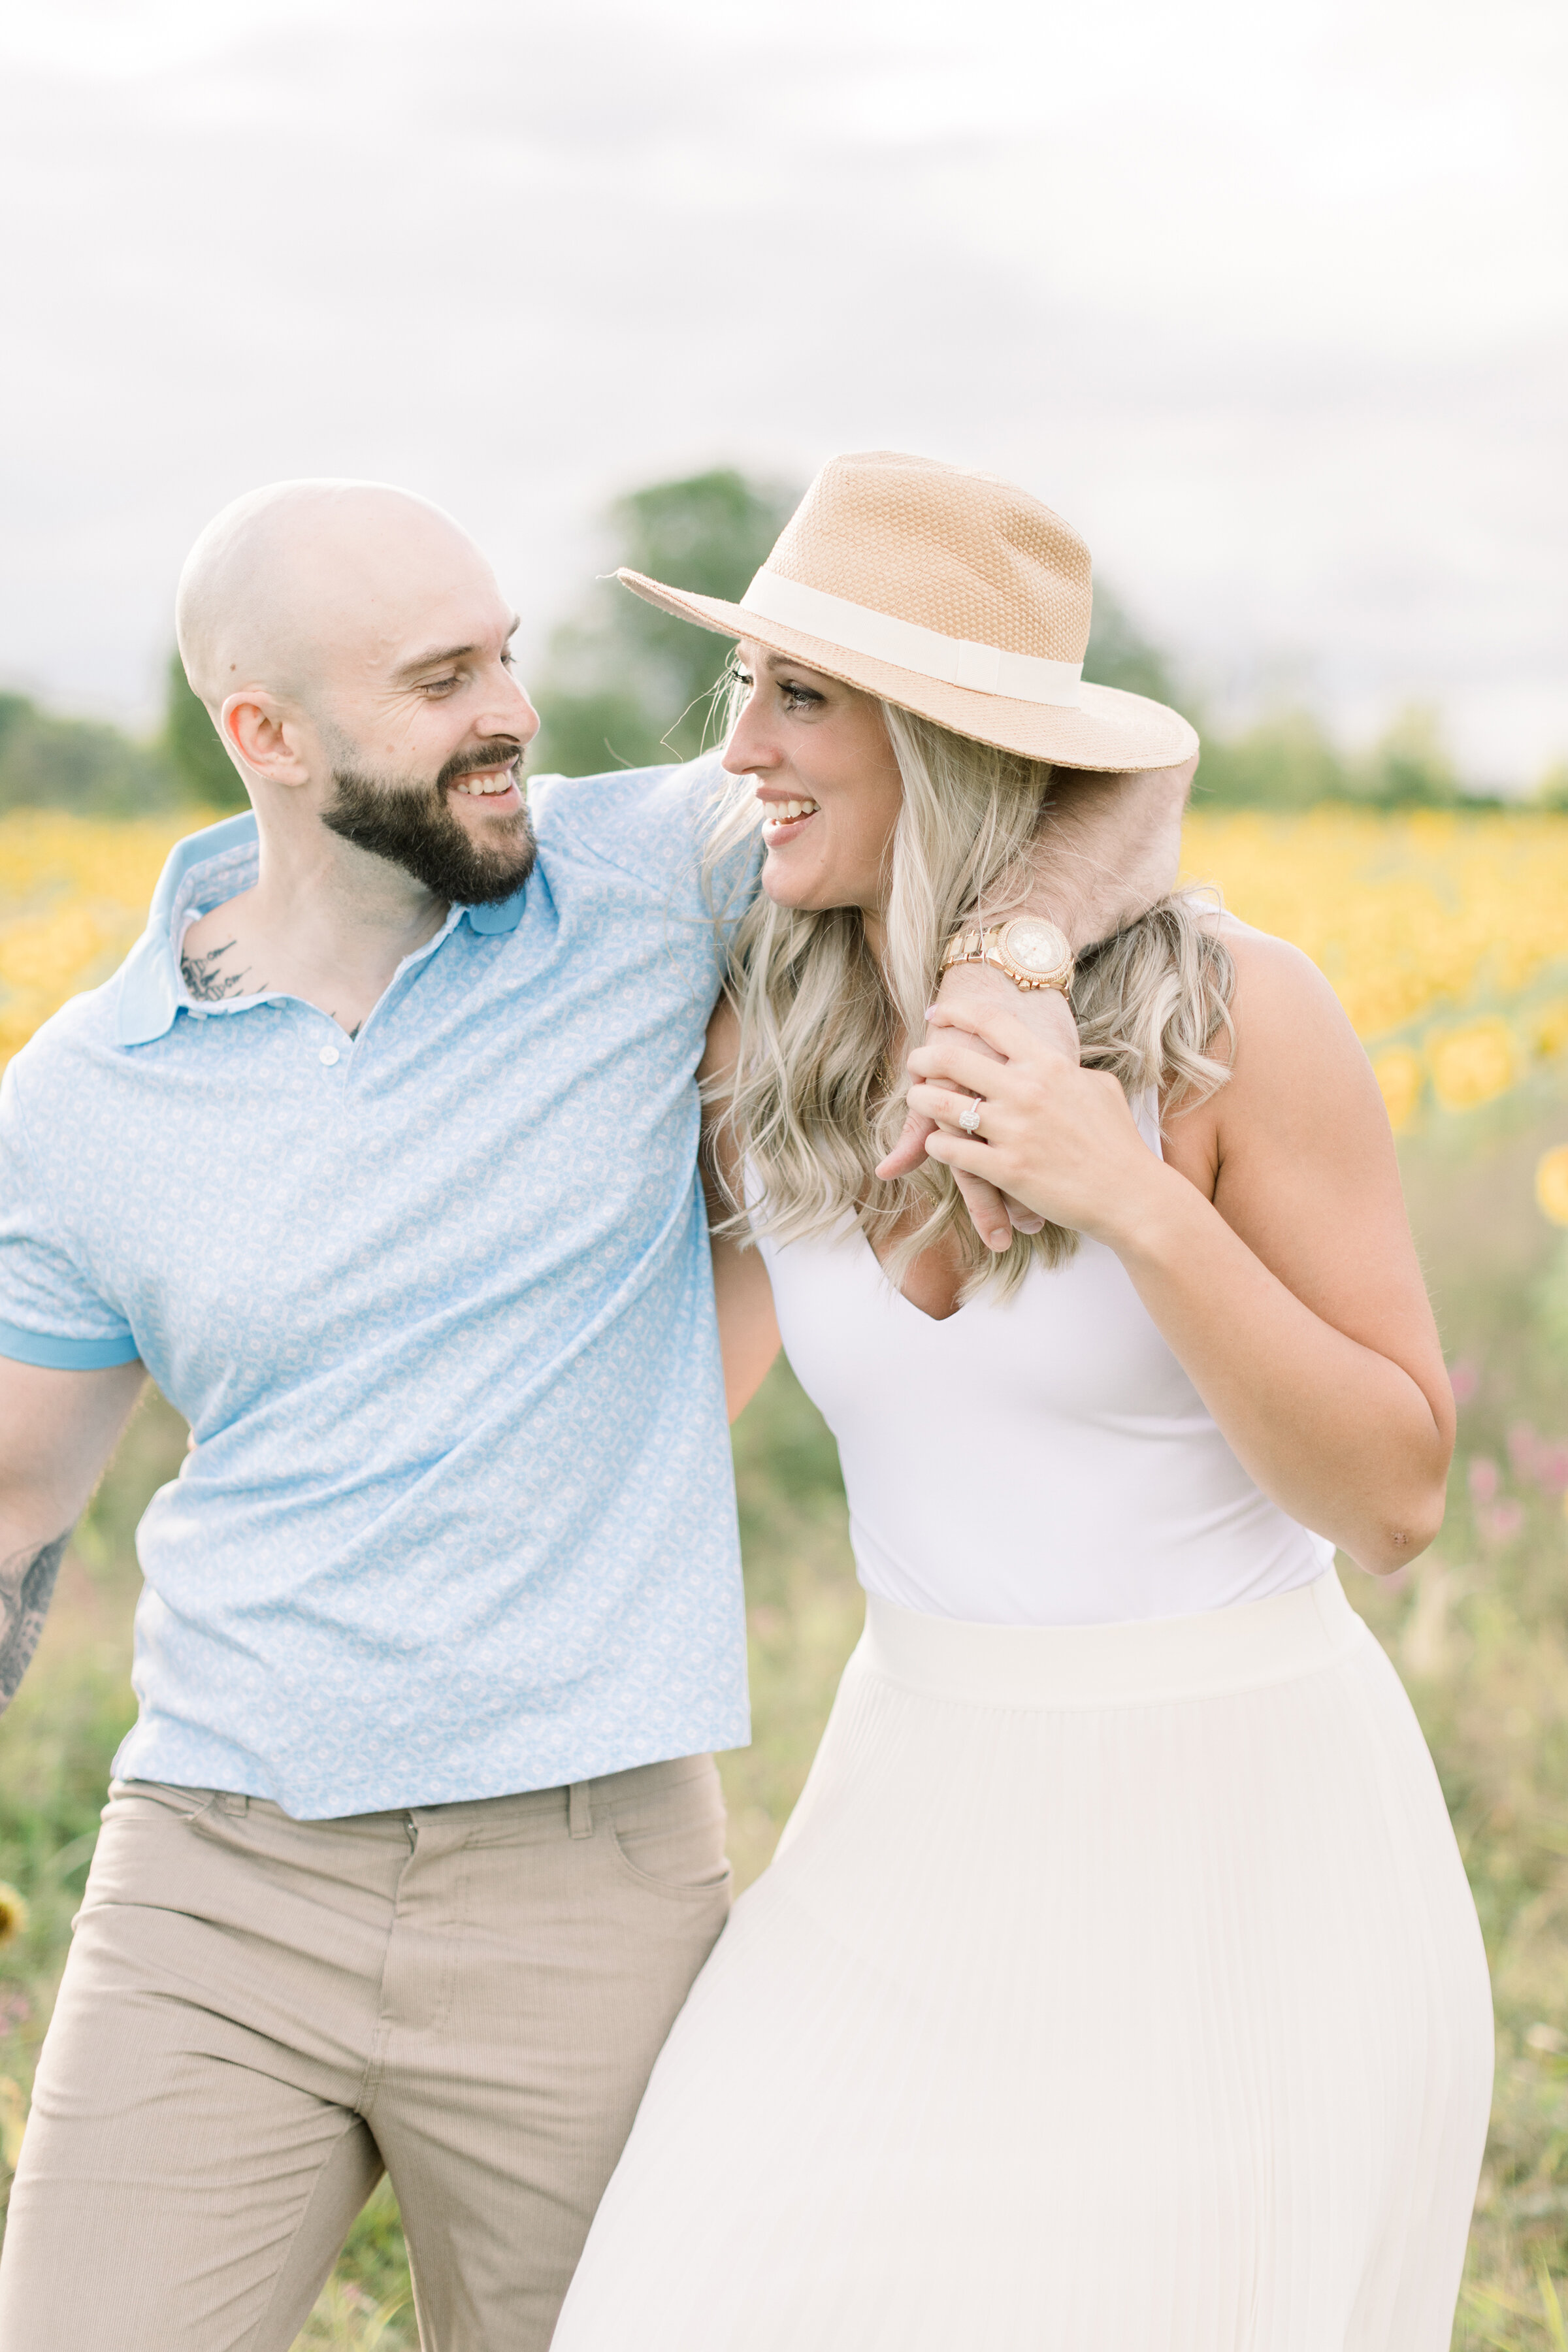  Soon to be bride and groom smile at each other as they walk in a beautiful warm sunflower engagement session in Ashton, Ontario by professional photographer Chelsea Mason Photography. Summer goals summer engagement outfit inspiration ideas and goals